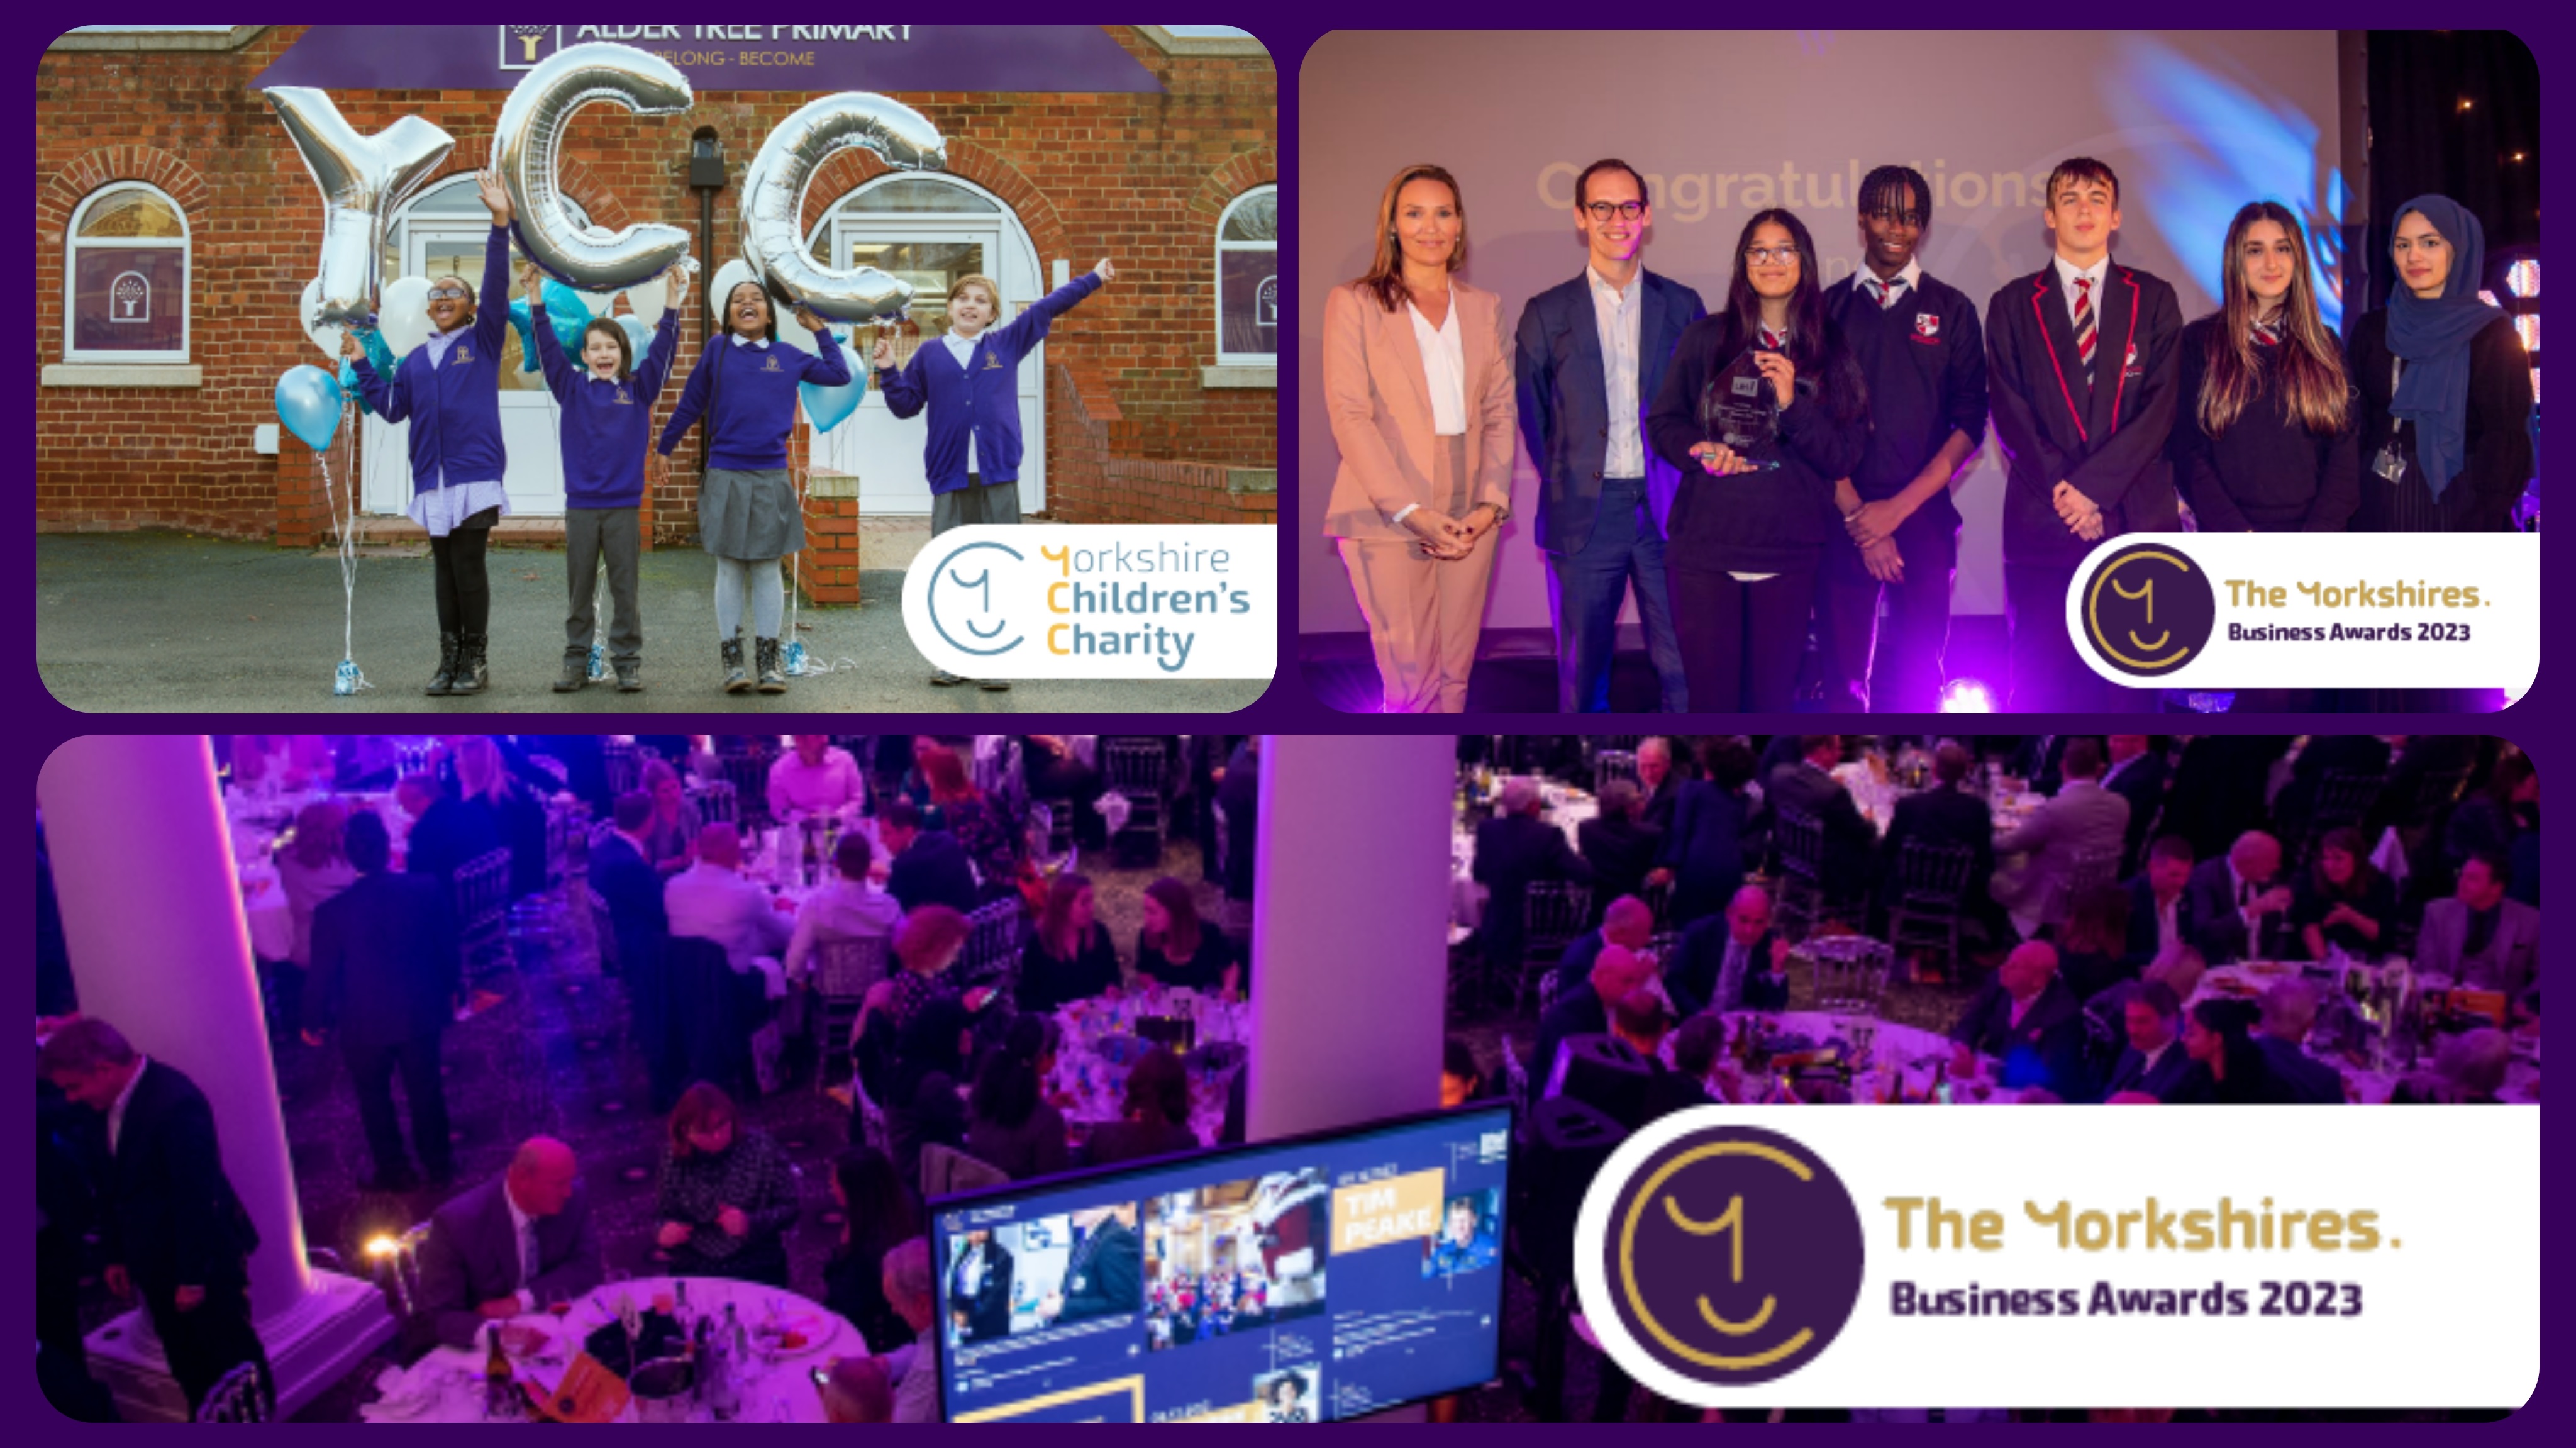 Images from The Yorkshires. Business awards 2023